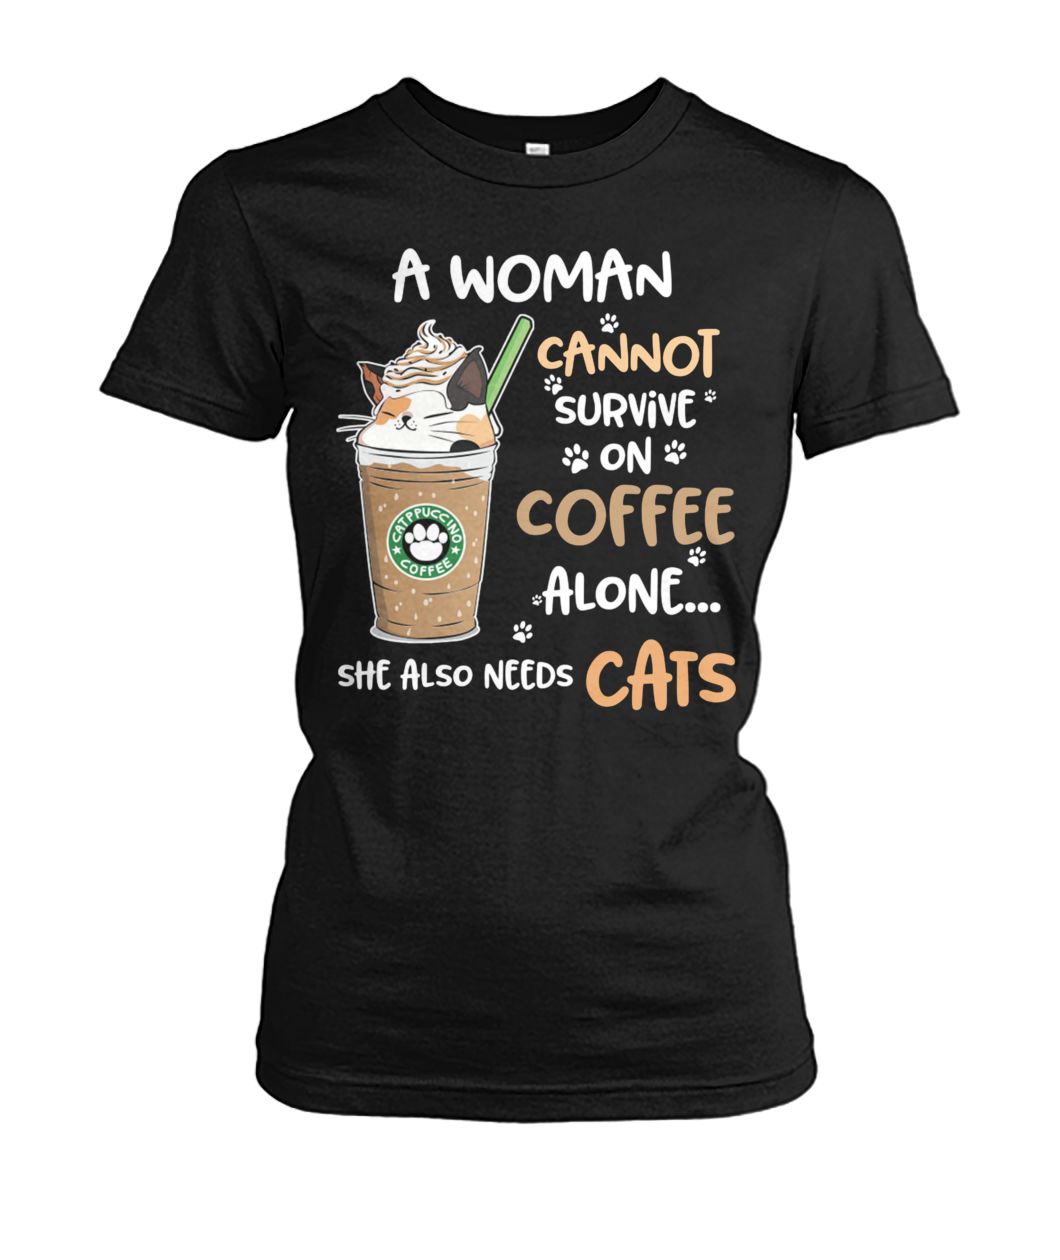 A woman cannot survive on coffee alone she also needs cats women's crew tee